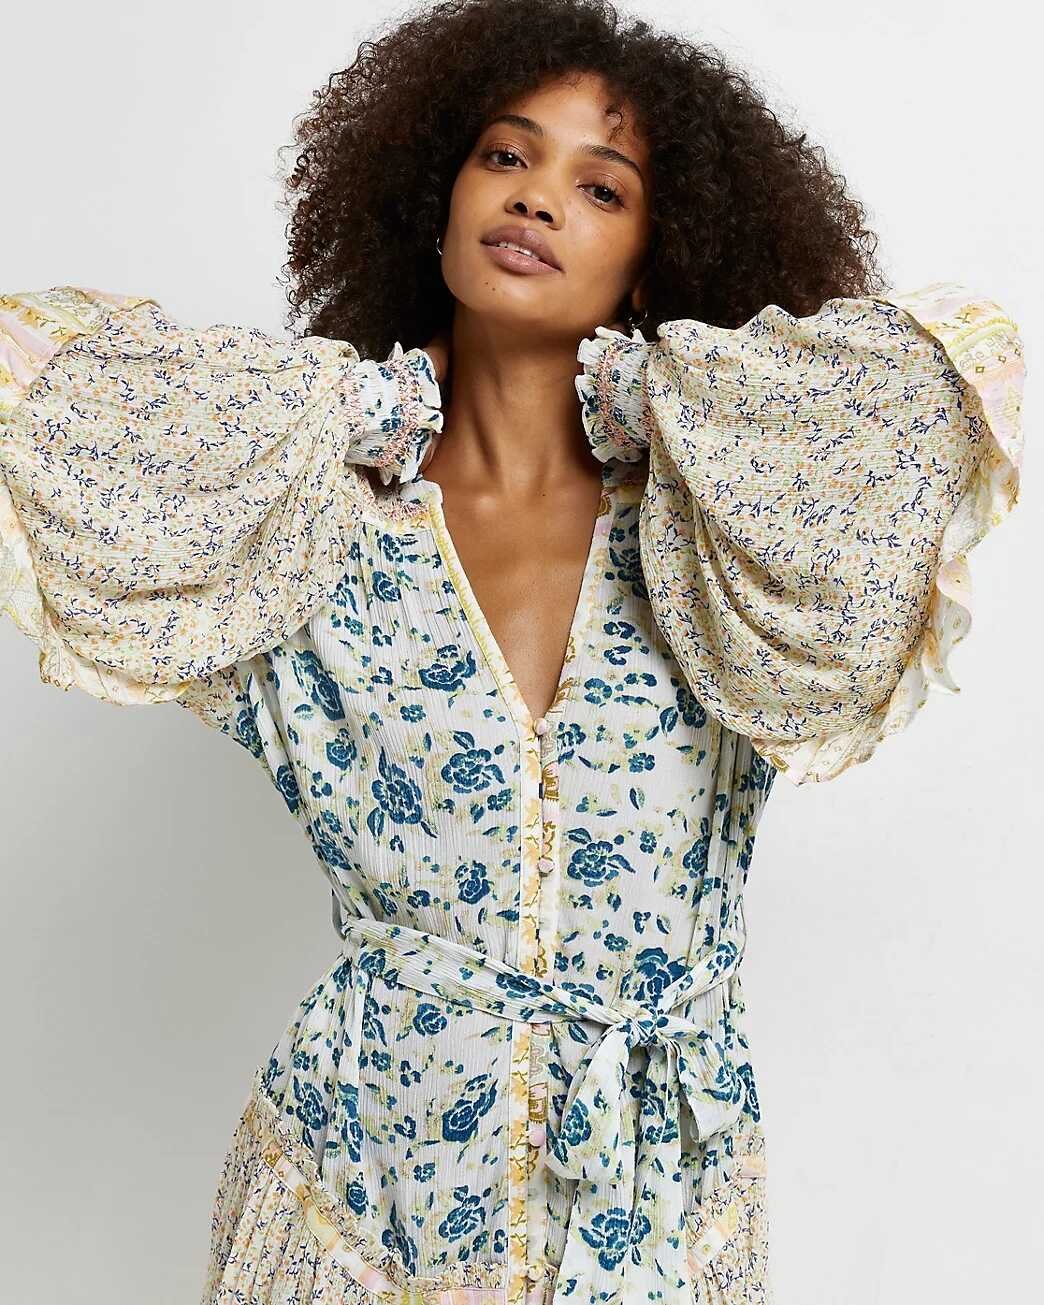 Over 50 Brands Similar to Free People to Gratify Your Inner Bohemian ...